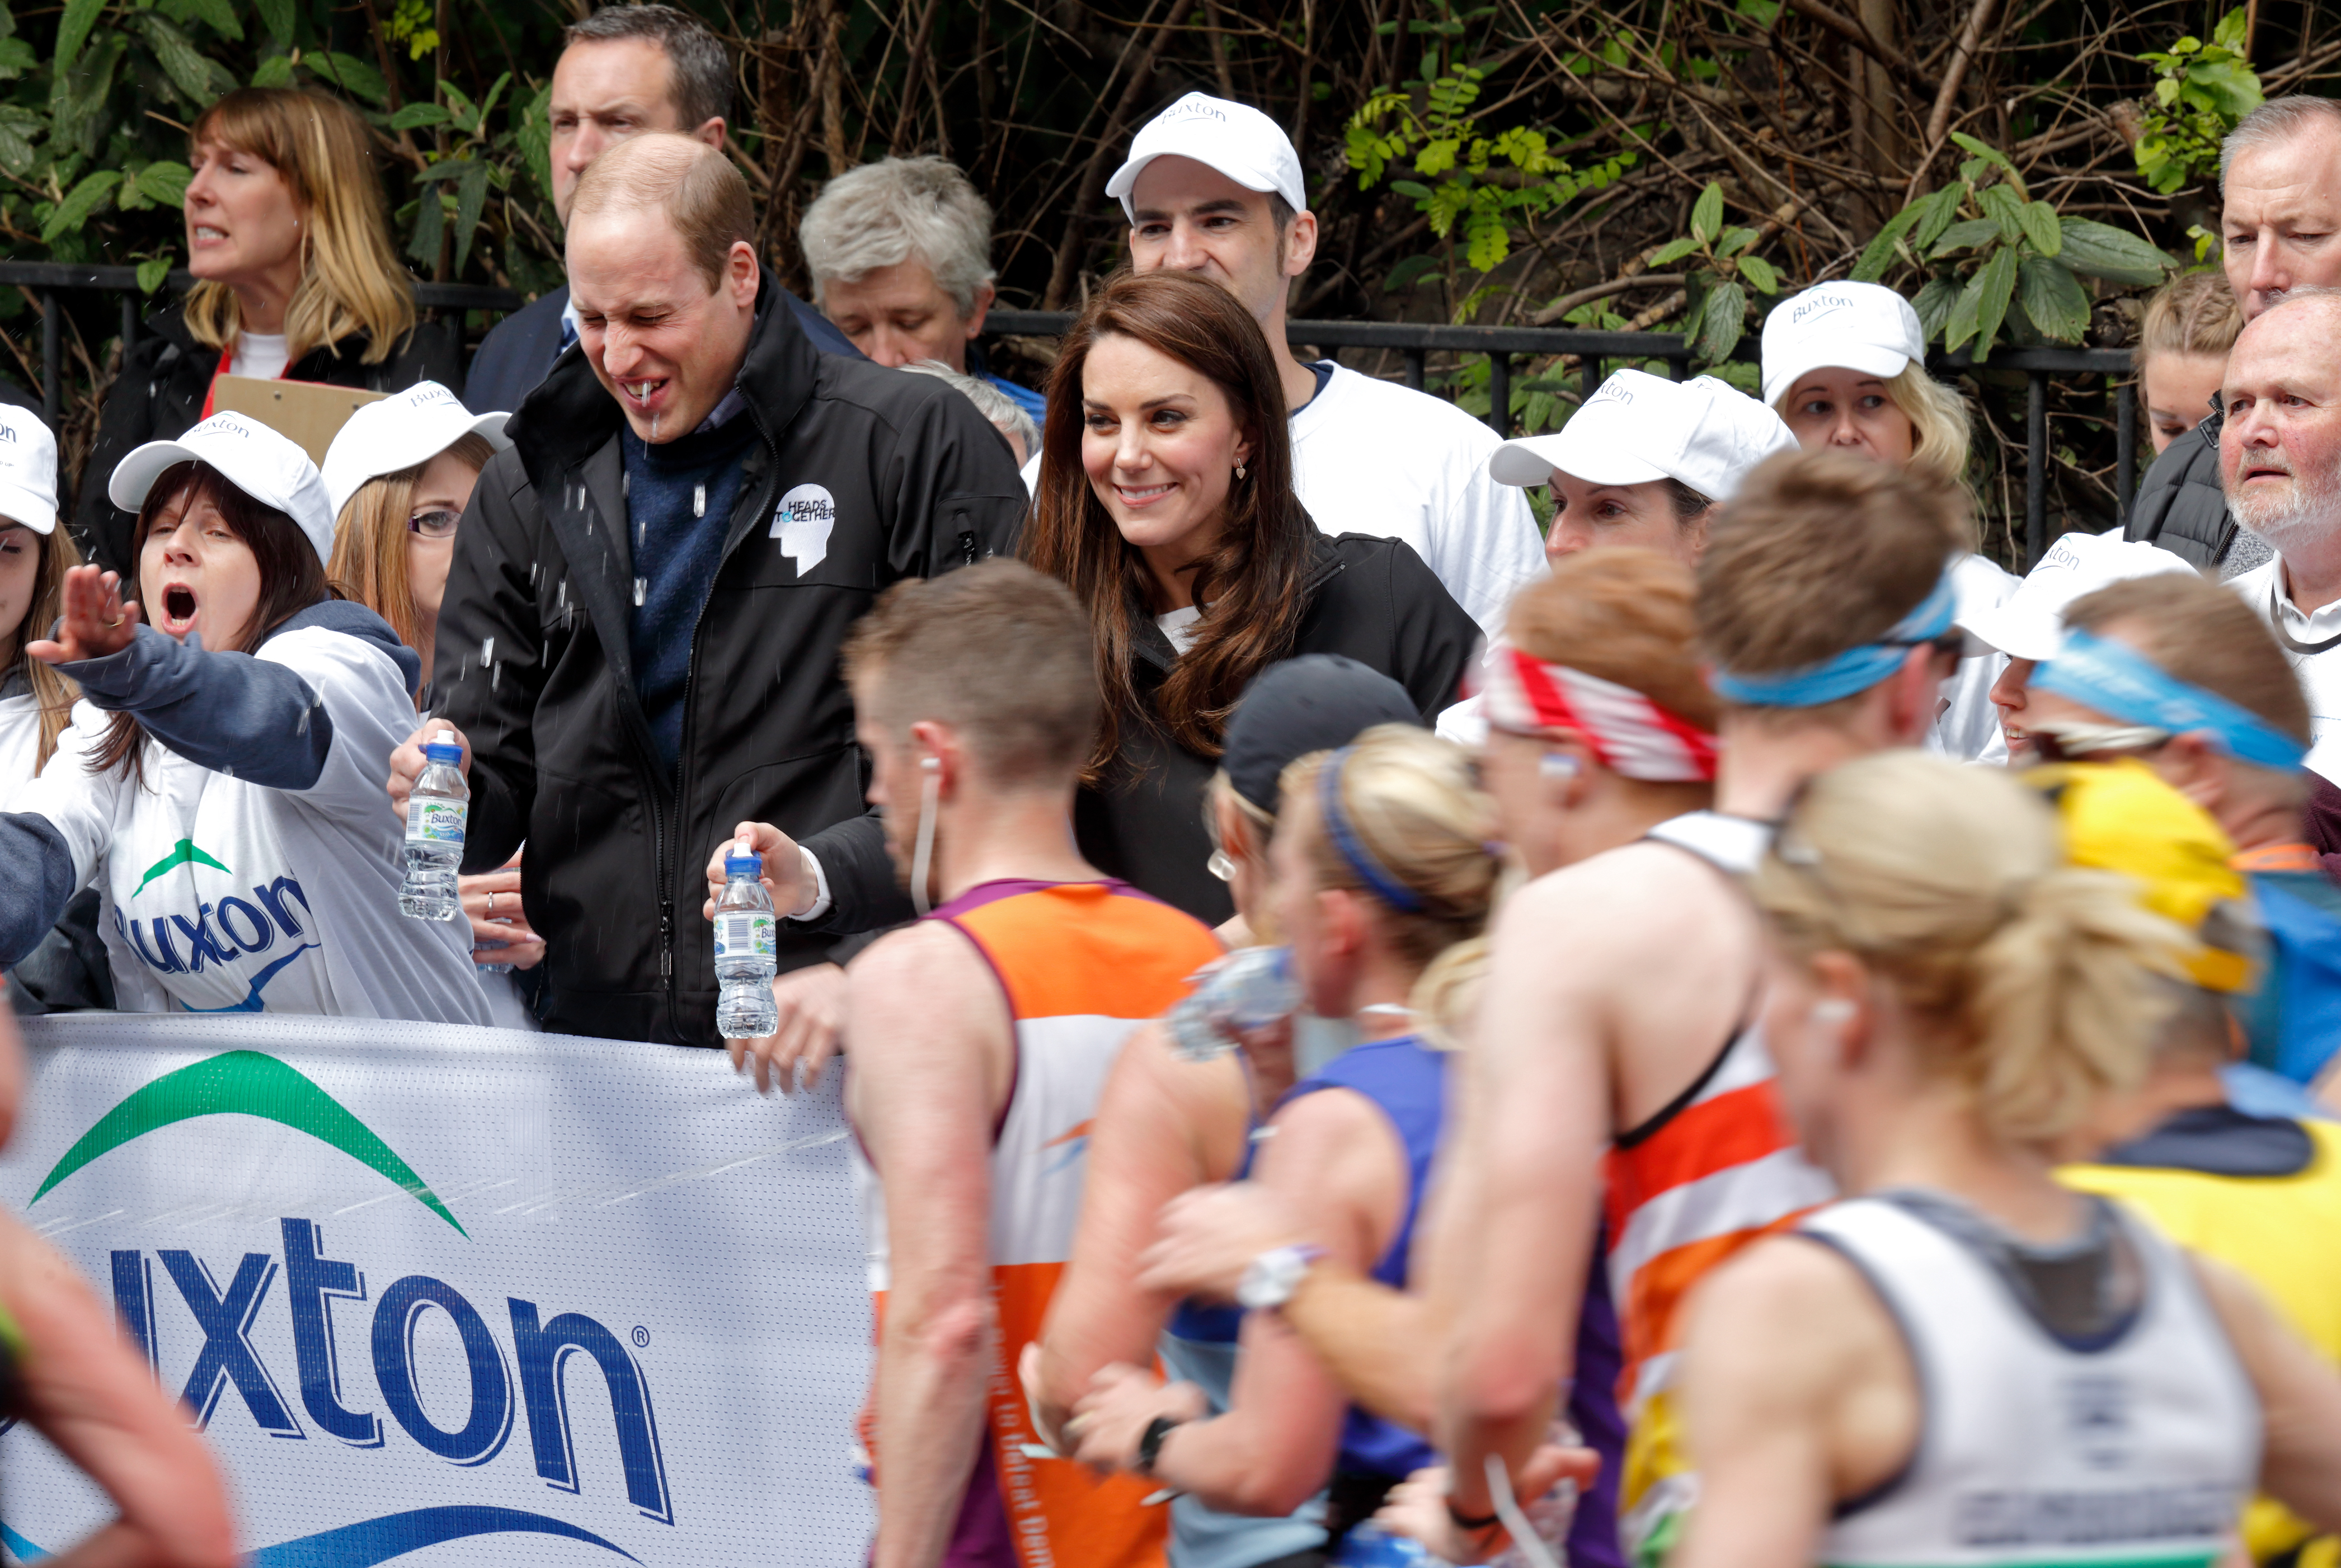 LONDON, UNITED KINGDOM - APRIL 23: (EMBARGOED FOR PUBLICATION IN UK NEWSPAPERS UNTIL 48 HOURS AFTER CREATE DATE AND TIME) Prince William, Duke of Cambridge is squirted with water as he & Catherine, Duchess of Cambridge hand out water to runners taking part in the 2017 Virgin Money London Marathon on April 23, 2017 in London, England. The Heads Together mental heath campaign, spearheaded by The Duke & Duchess of Cambridge and Prince Harry, is the marathon's 2017 Charity of the Year. (Photo by Max Mumby/Indigo/Getty Images) (Max Mumby—Getty Images)